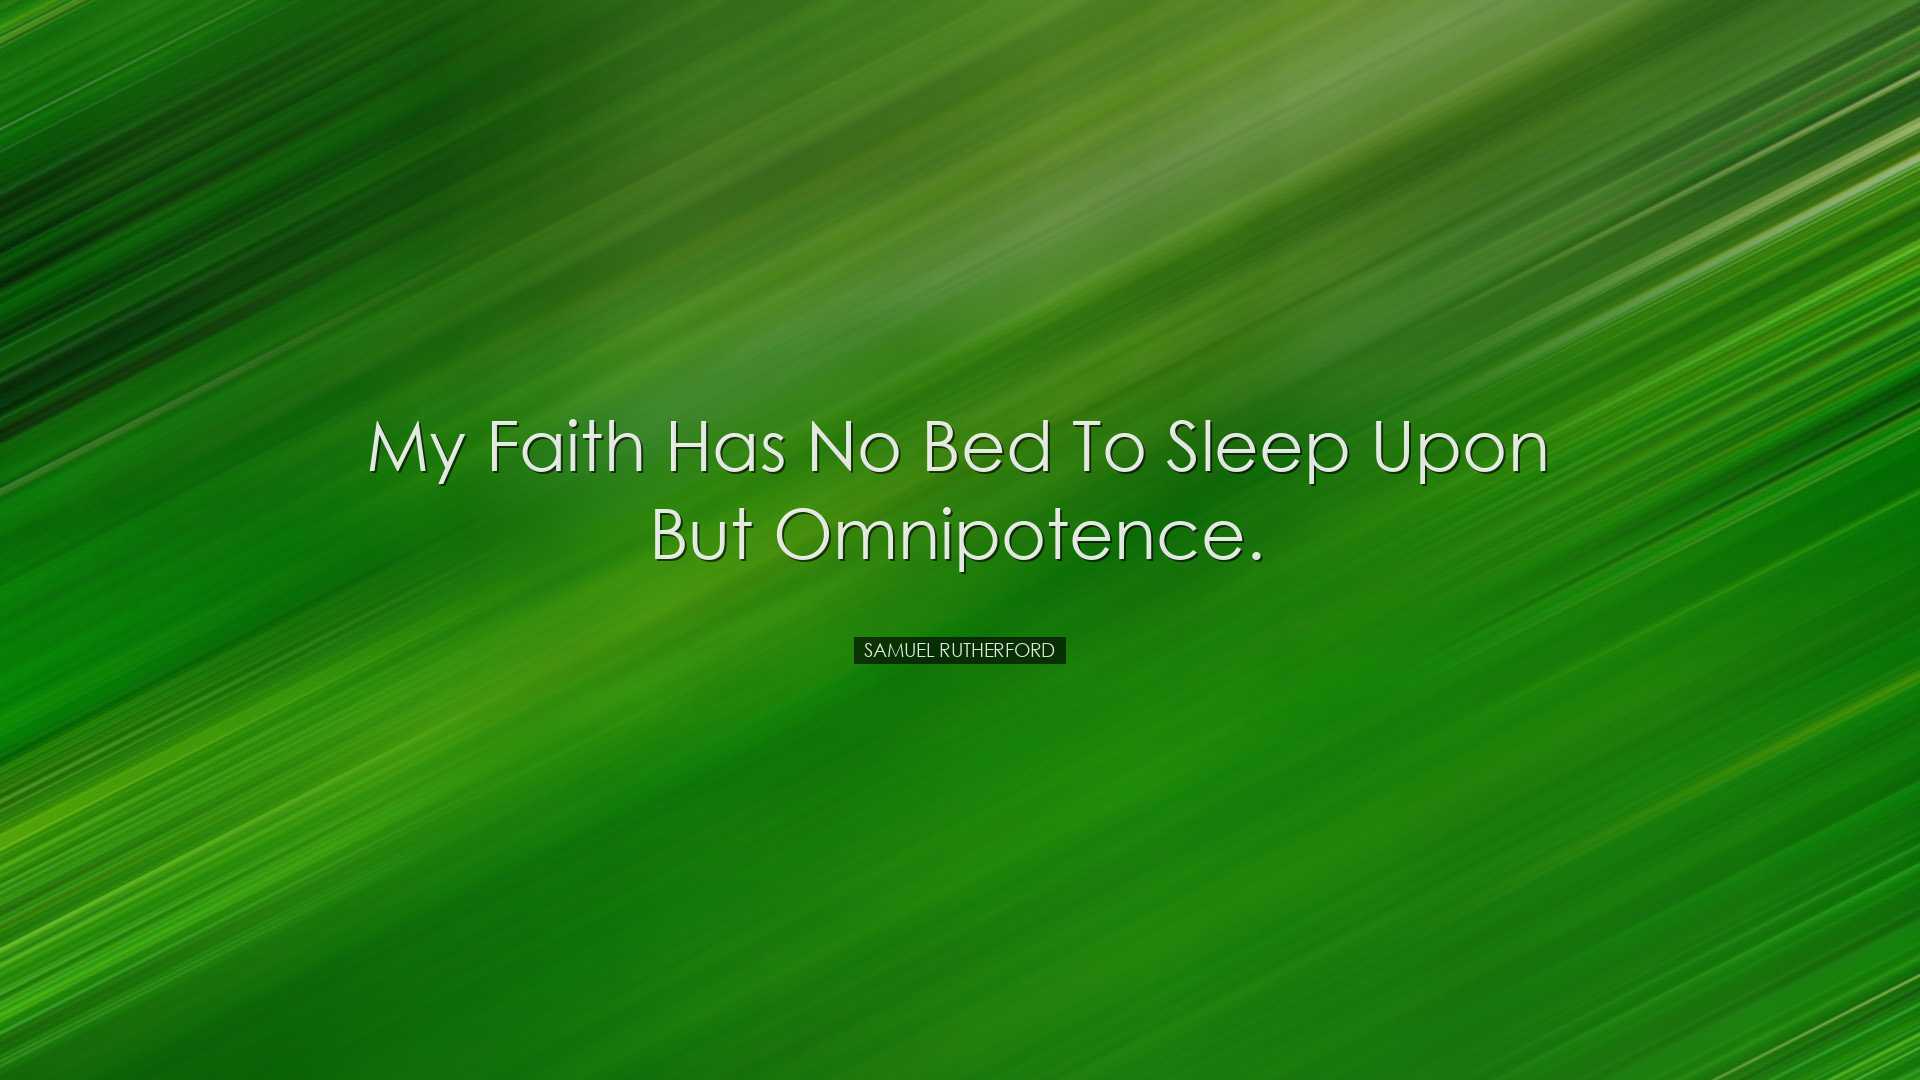 My faith has no bed to sleep upon but omnipotence. - Samuel Ruther